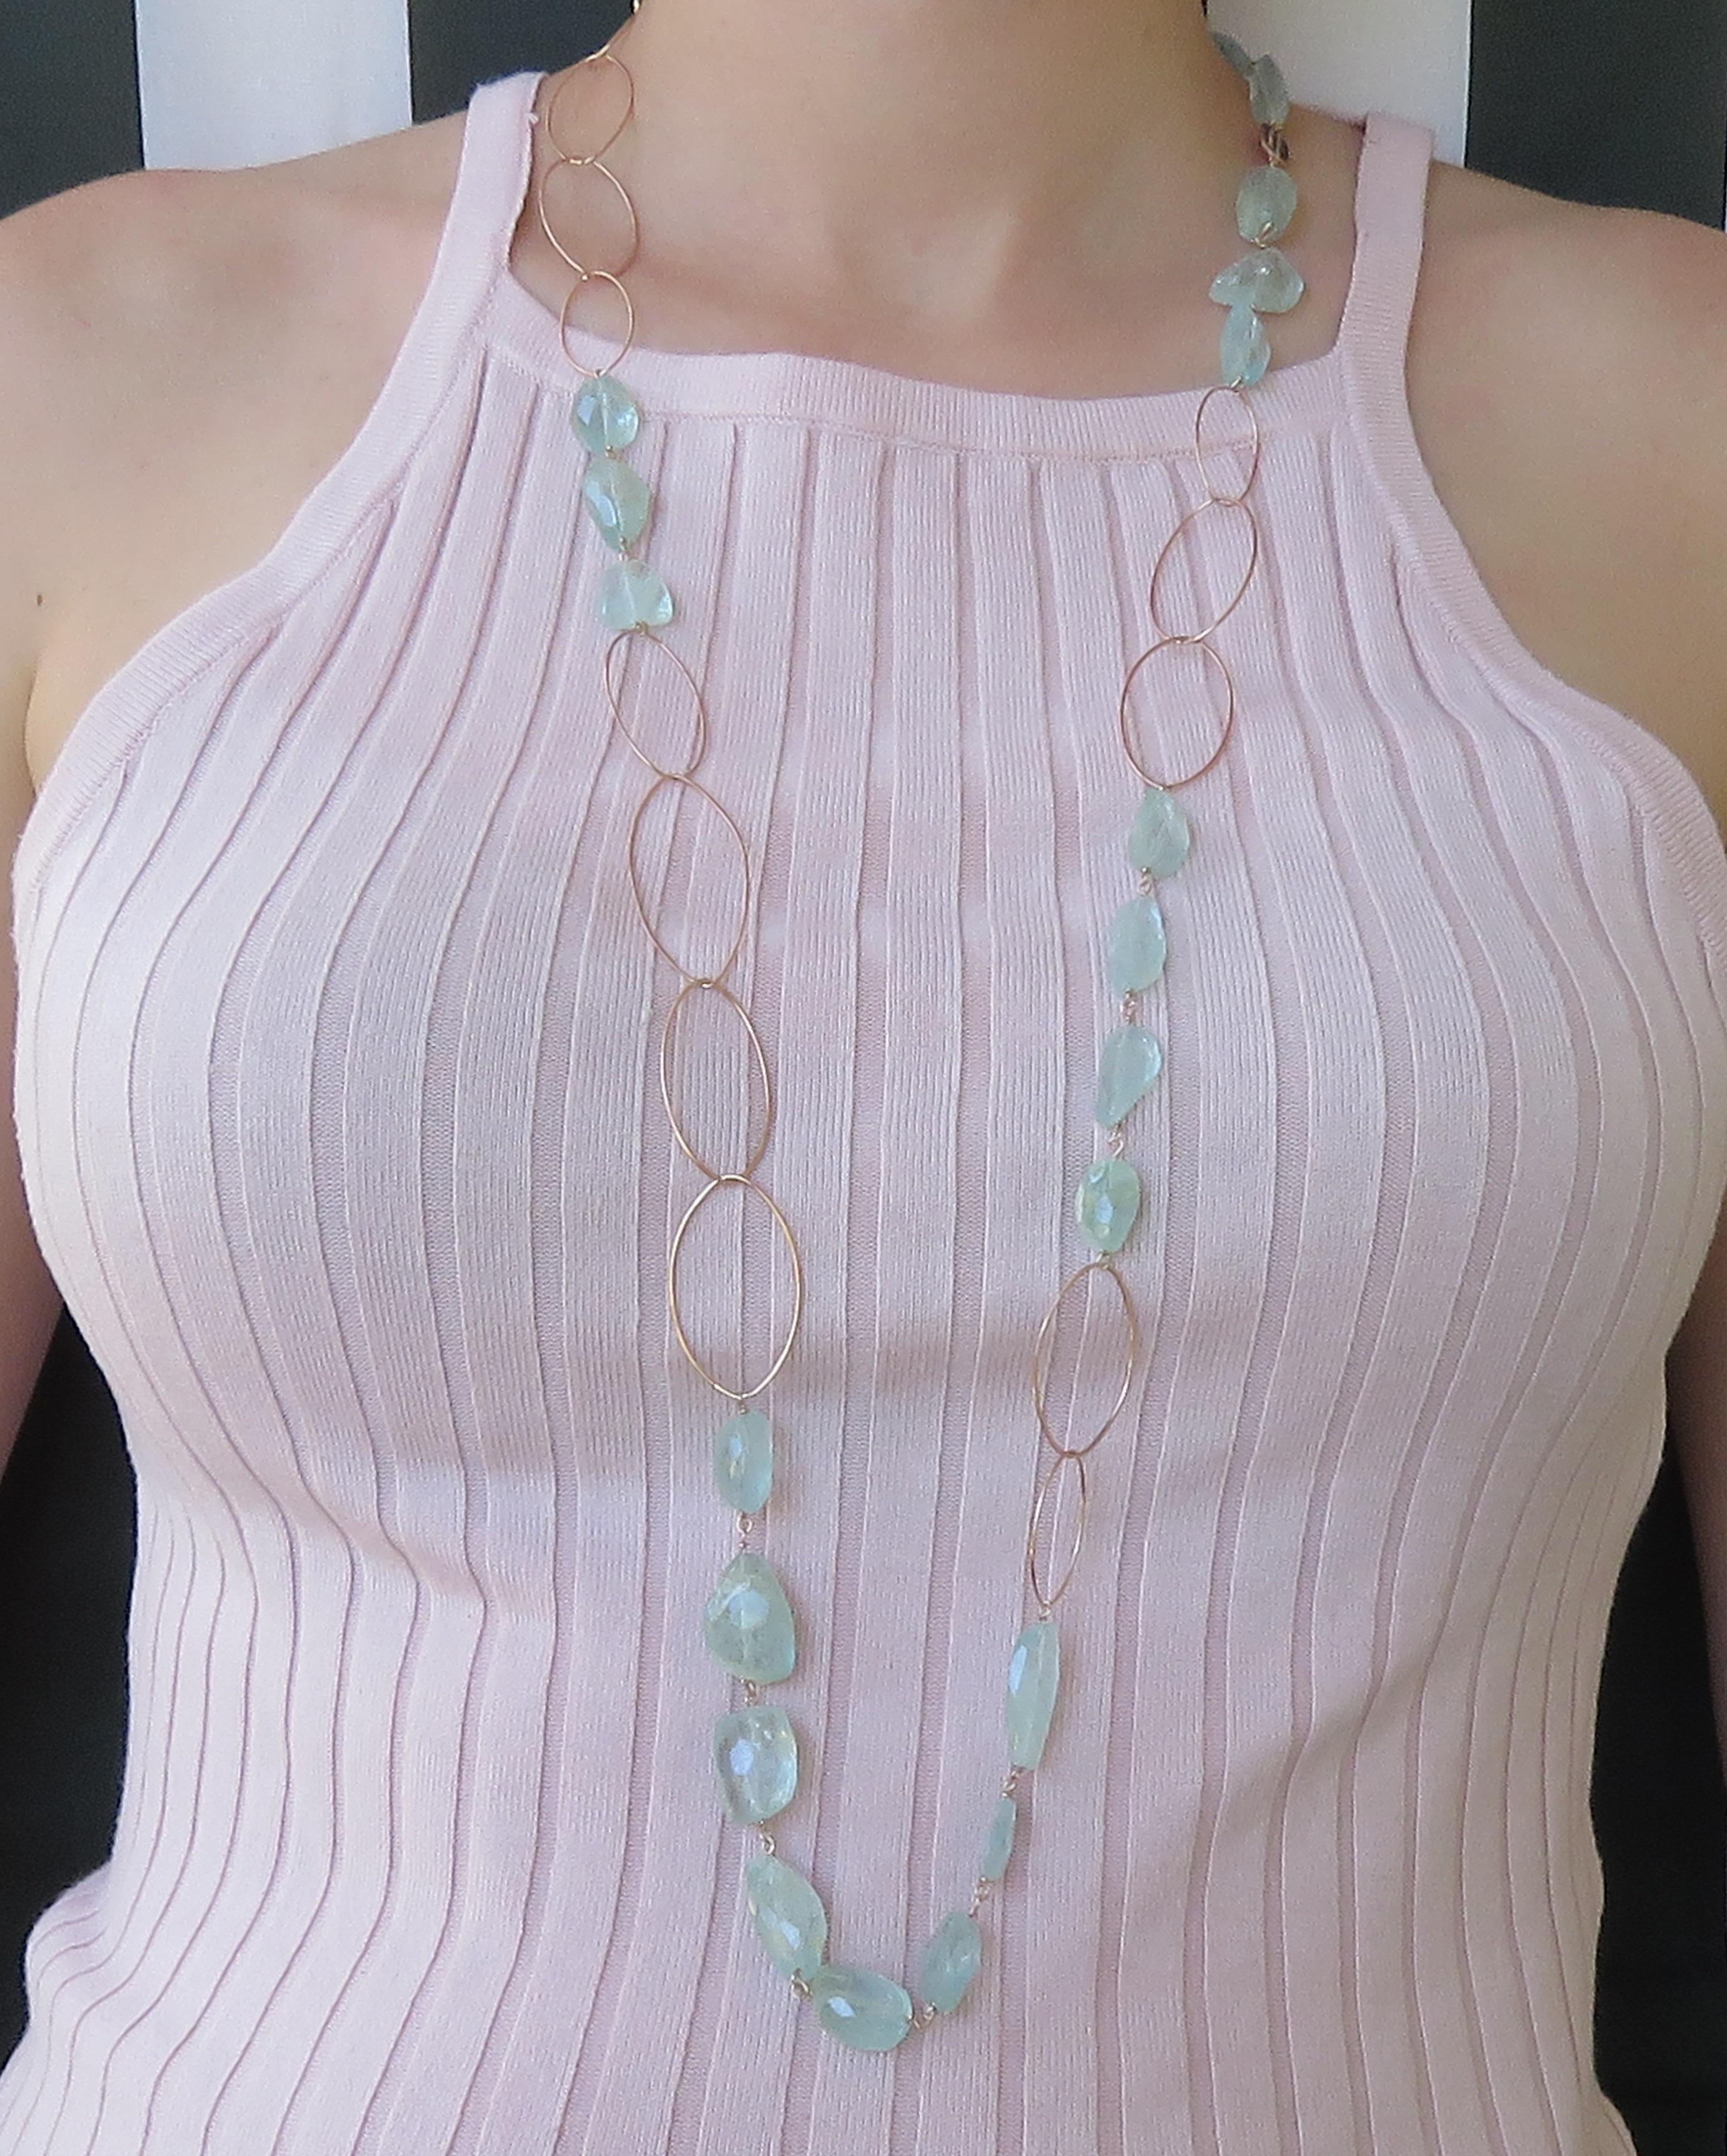 This beautiful aquamarine necklace is chained in 9 karat rose gold. The length of the necklace is 920 millimeters / 36.220 inches. This item is stamped with the Italian gold mark 375 and Botta Gioielli brandmark